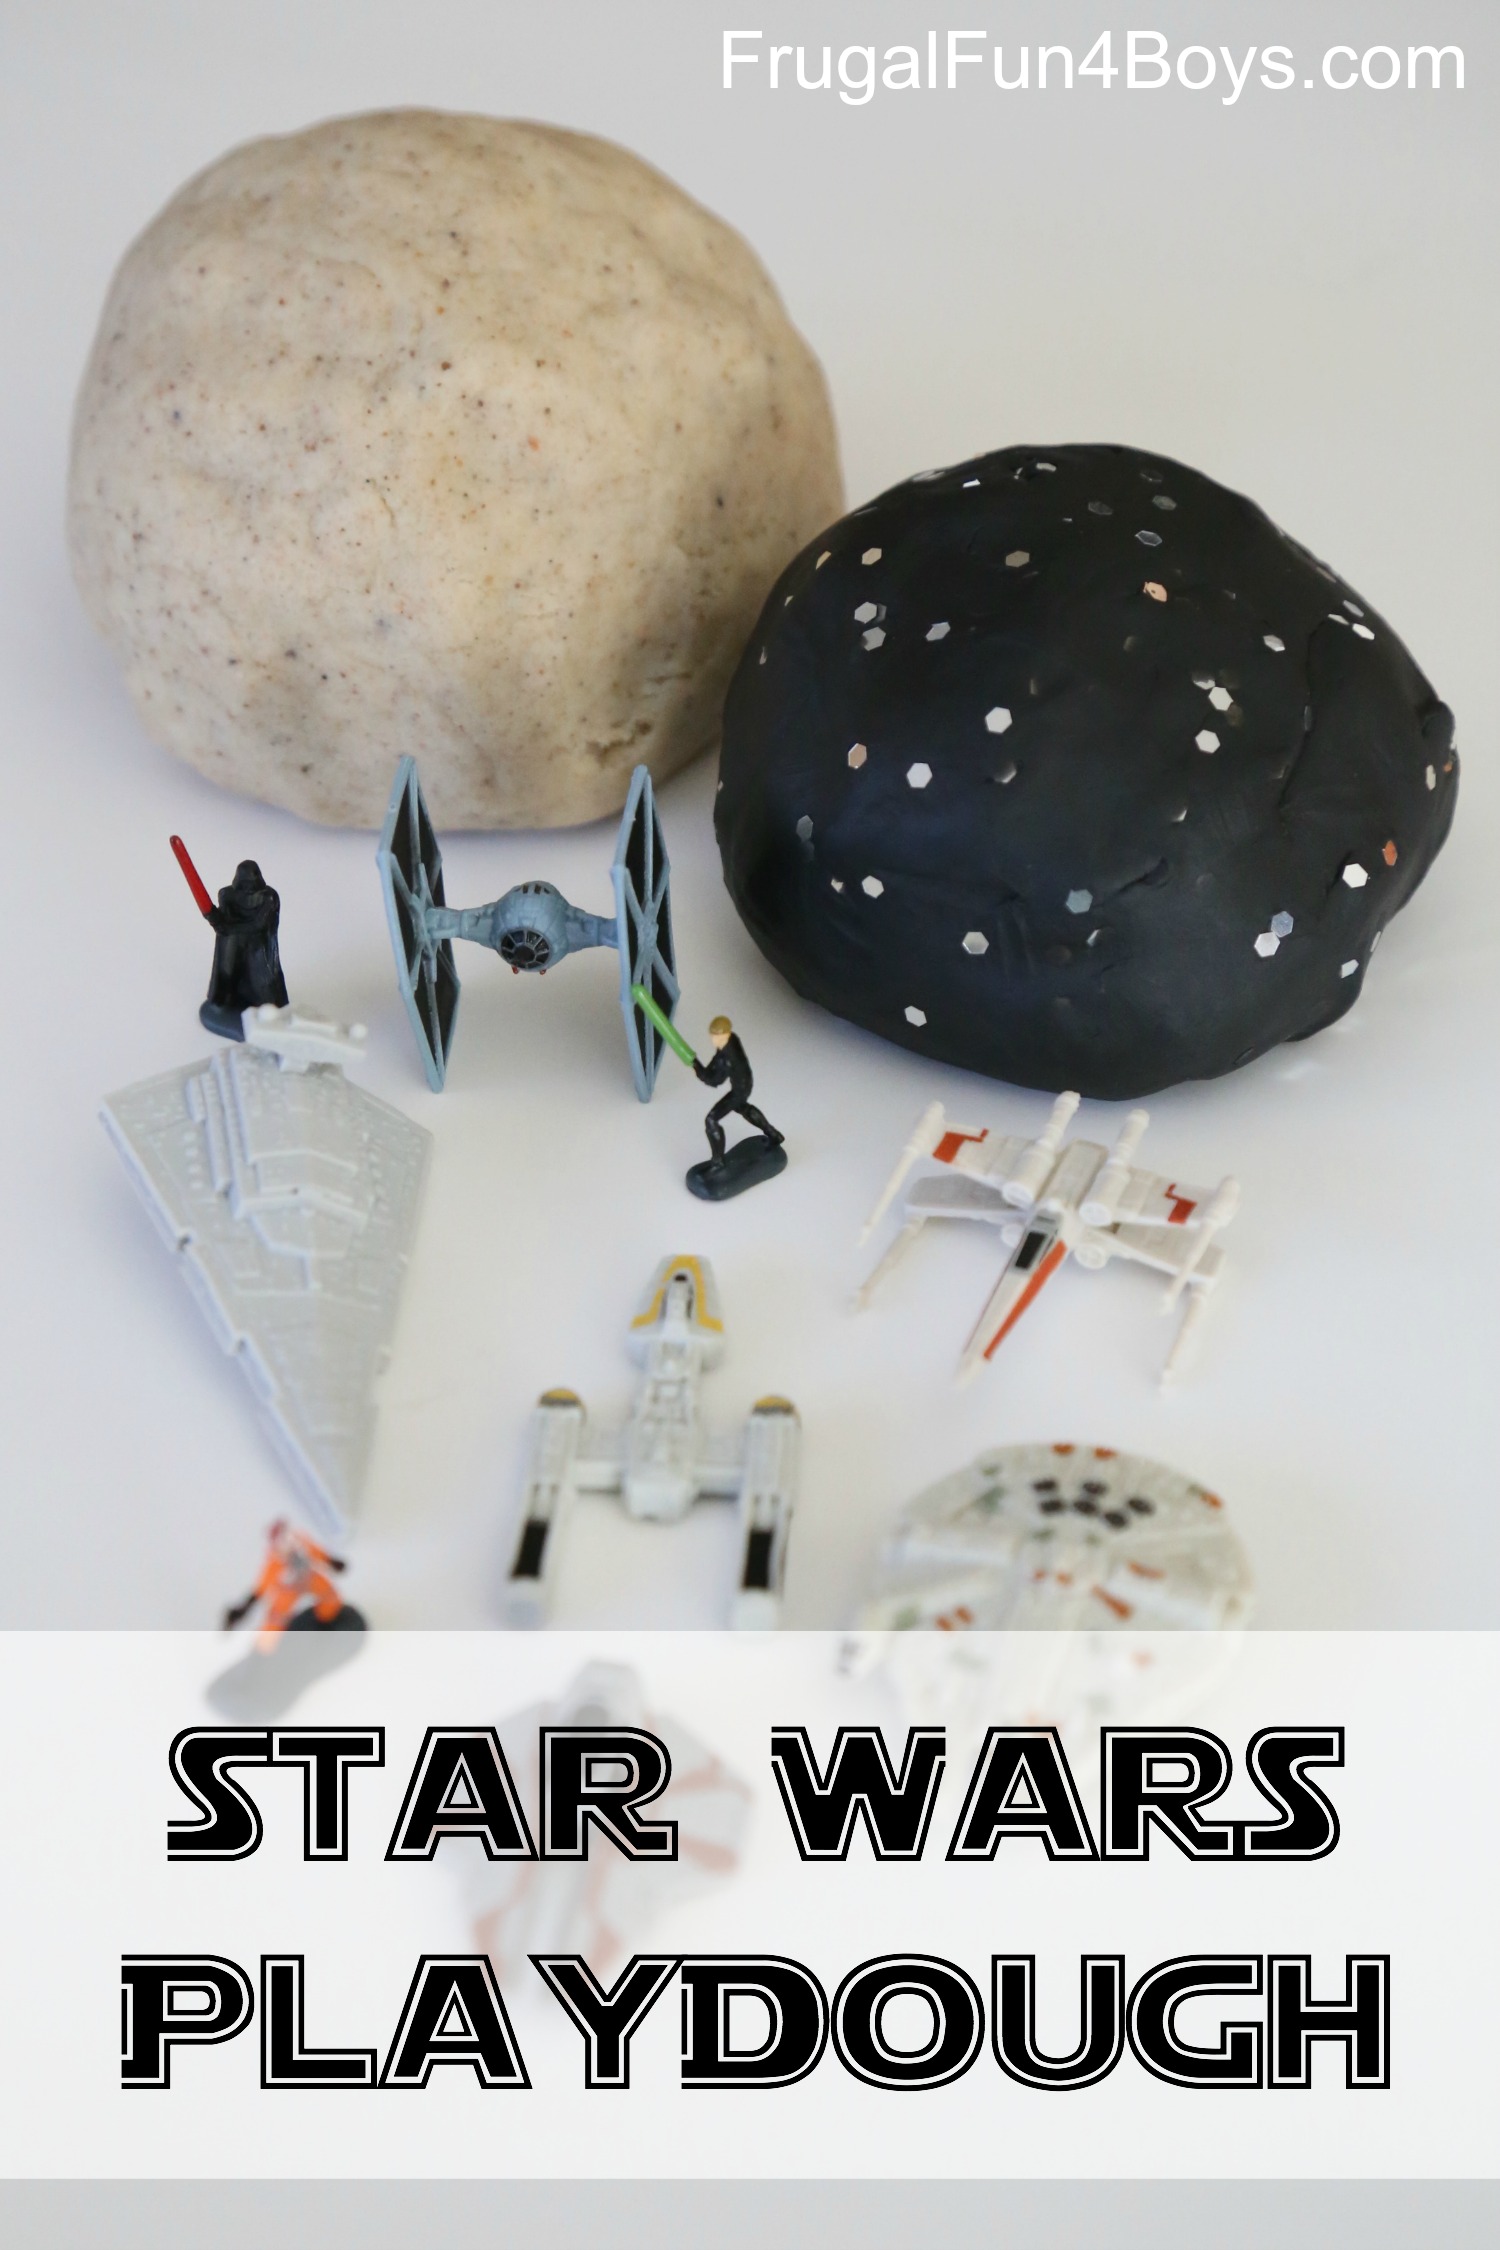 Star Wars Play Dough Imaginative Play! - Frugal Fun For Boys and Girls